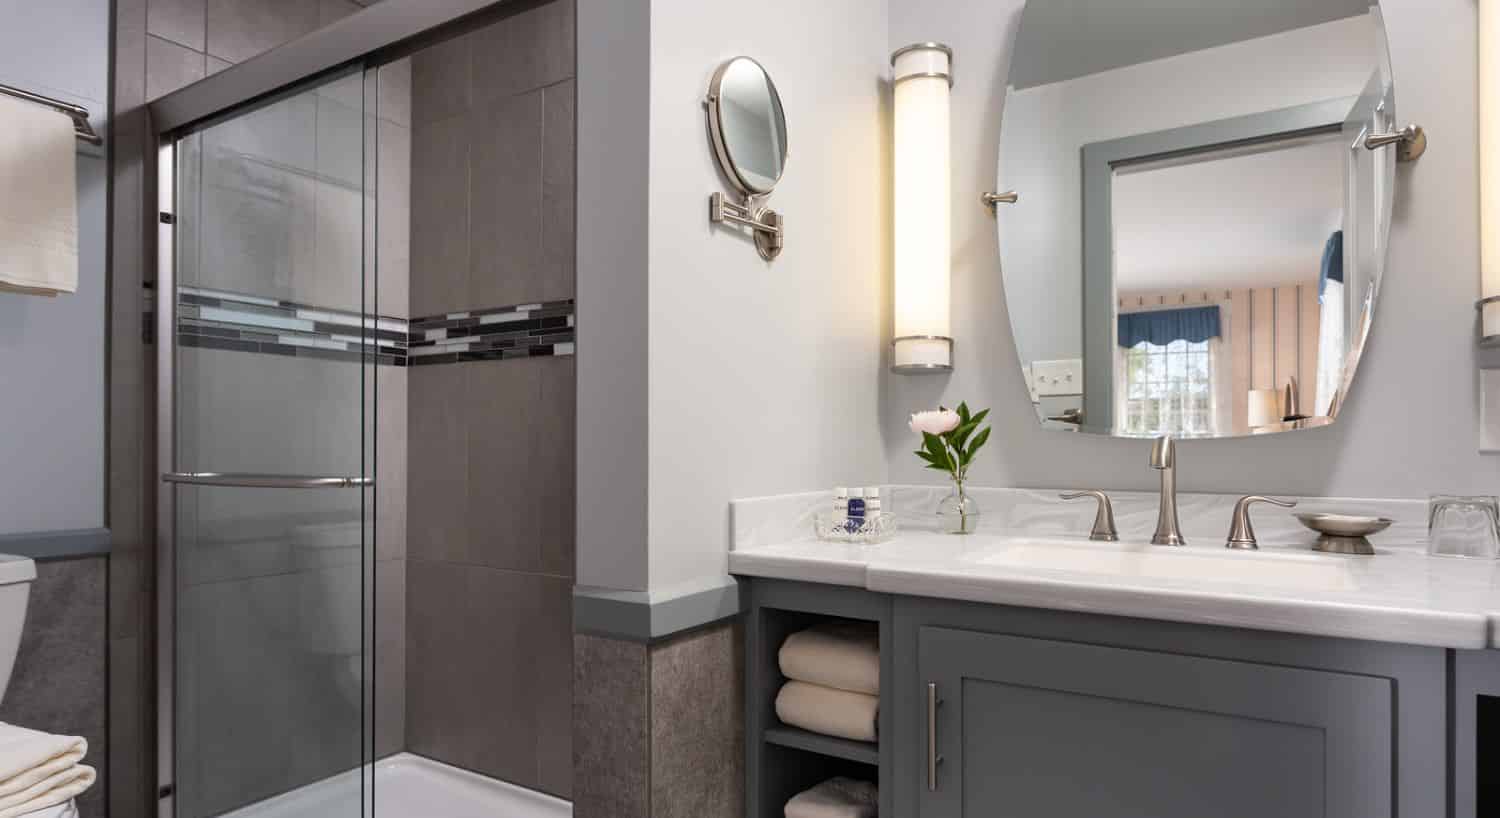 Bathroom with light gray walls, dark gray vanity, gray-tiled stand up shower, and large mirror